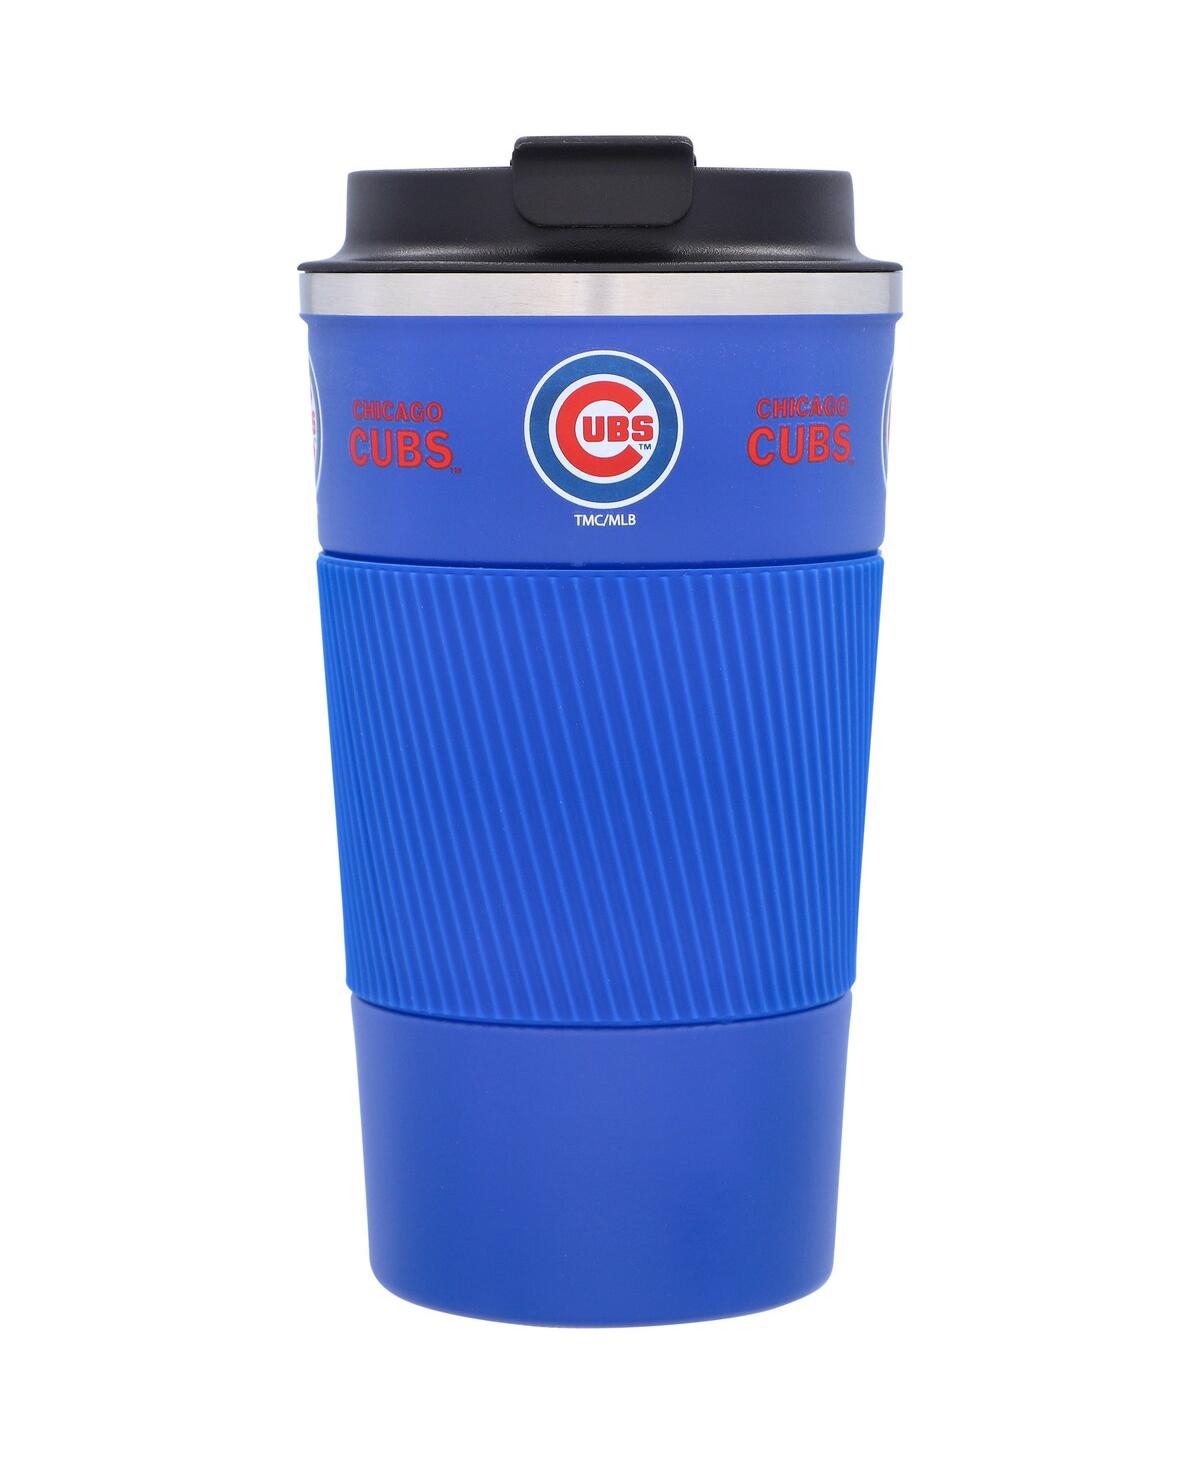 Memory Company Chicago Cubs 18 oz Coffee Tumbler With Silicone Grip In Royal